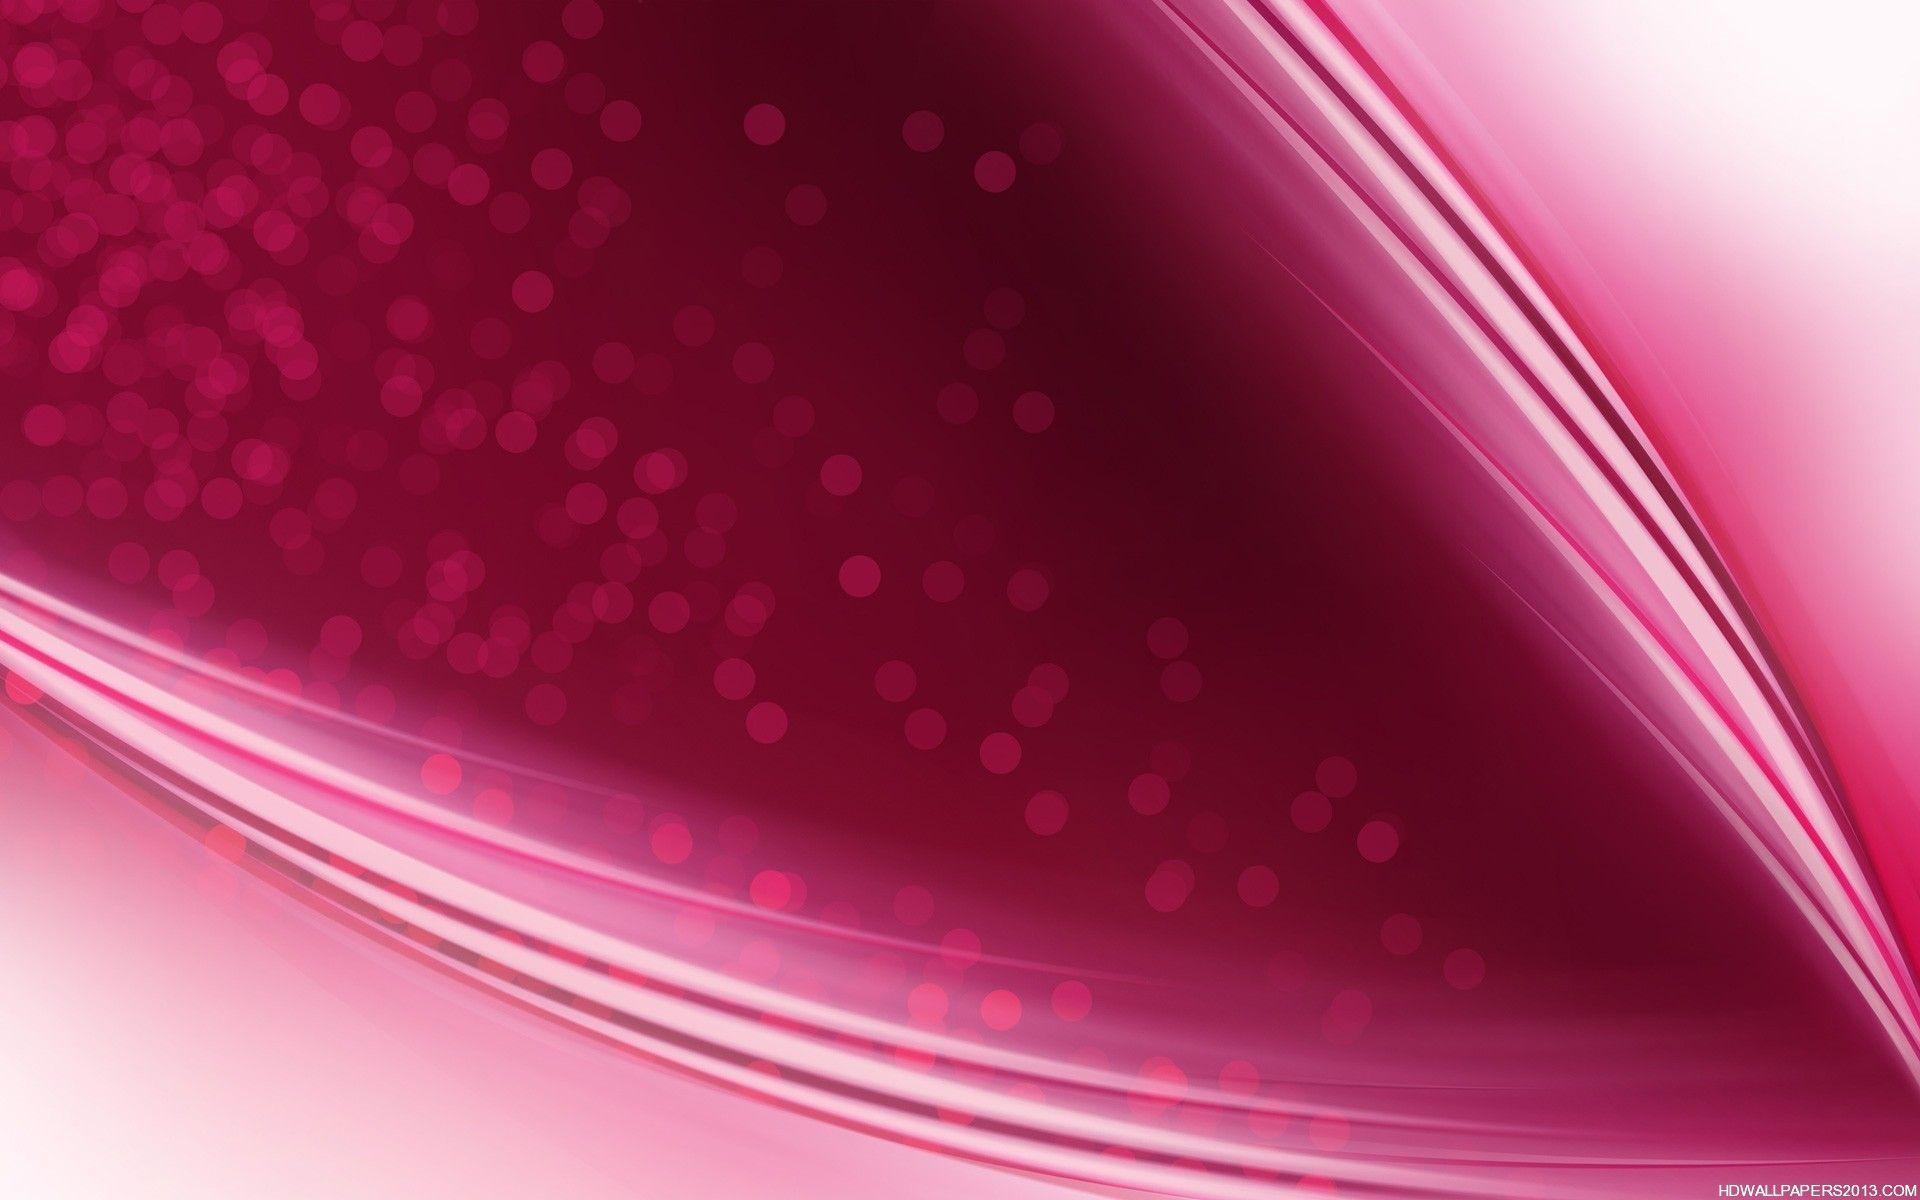 Pink Abstract. Image. Wallpaper free download, Pink